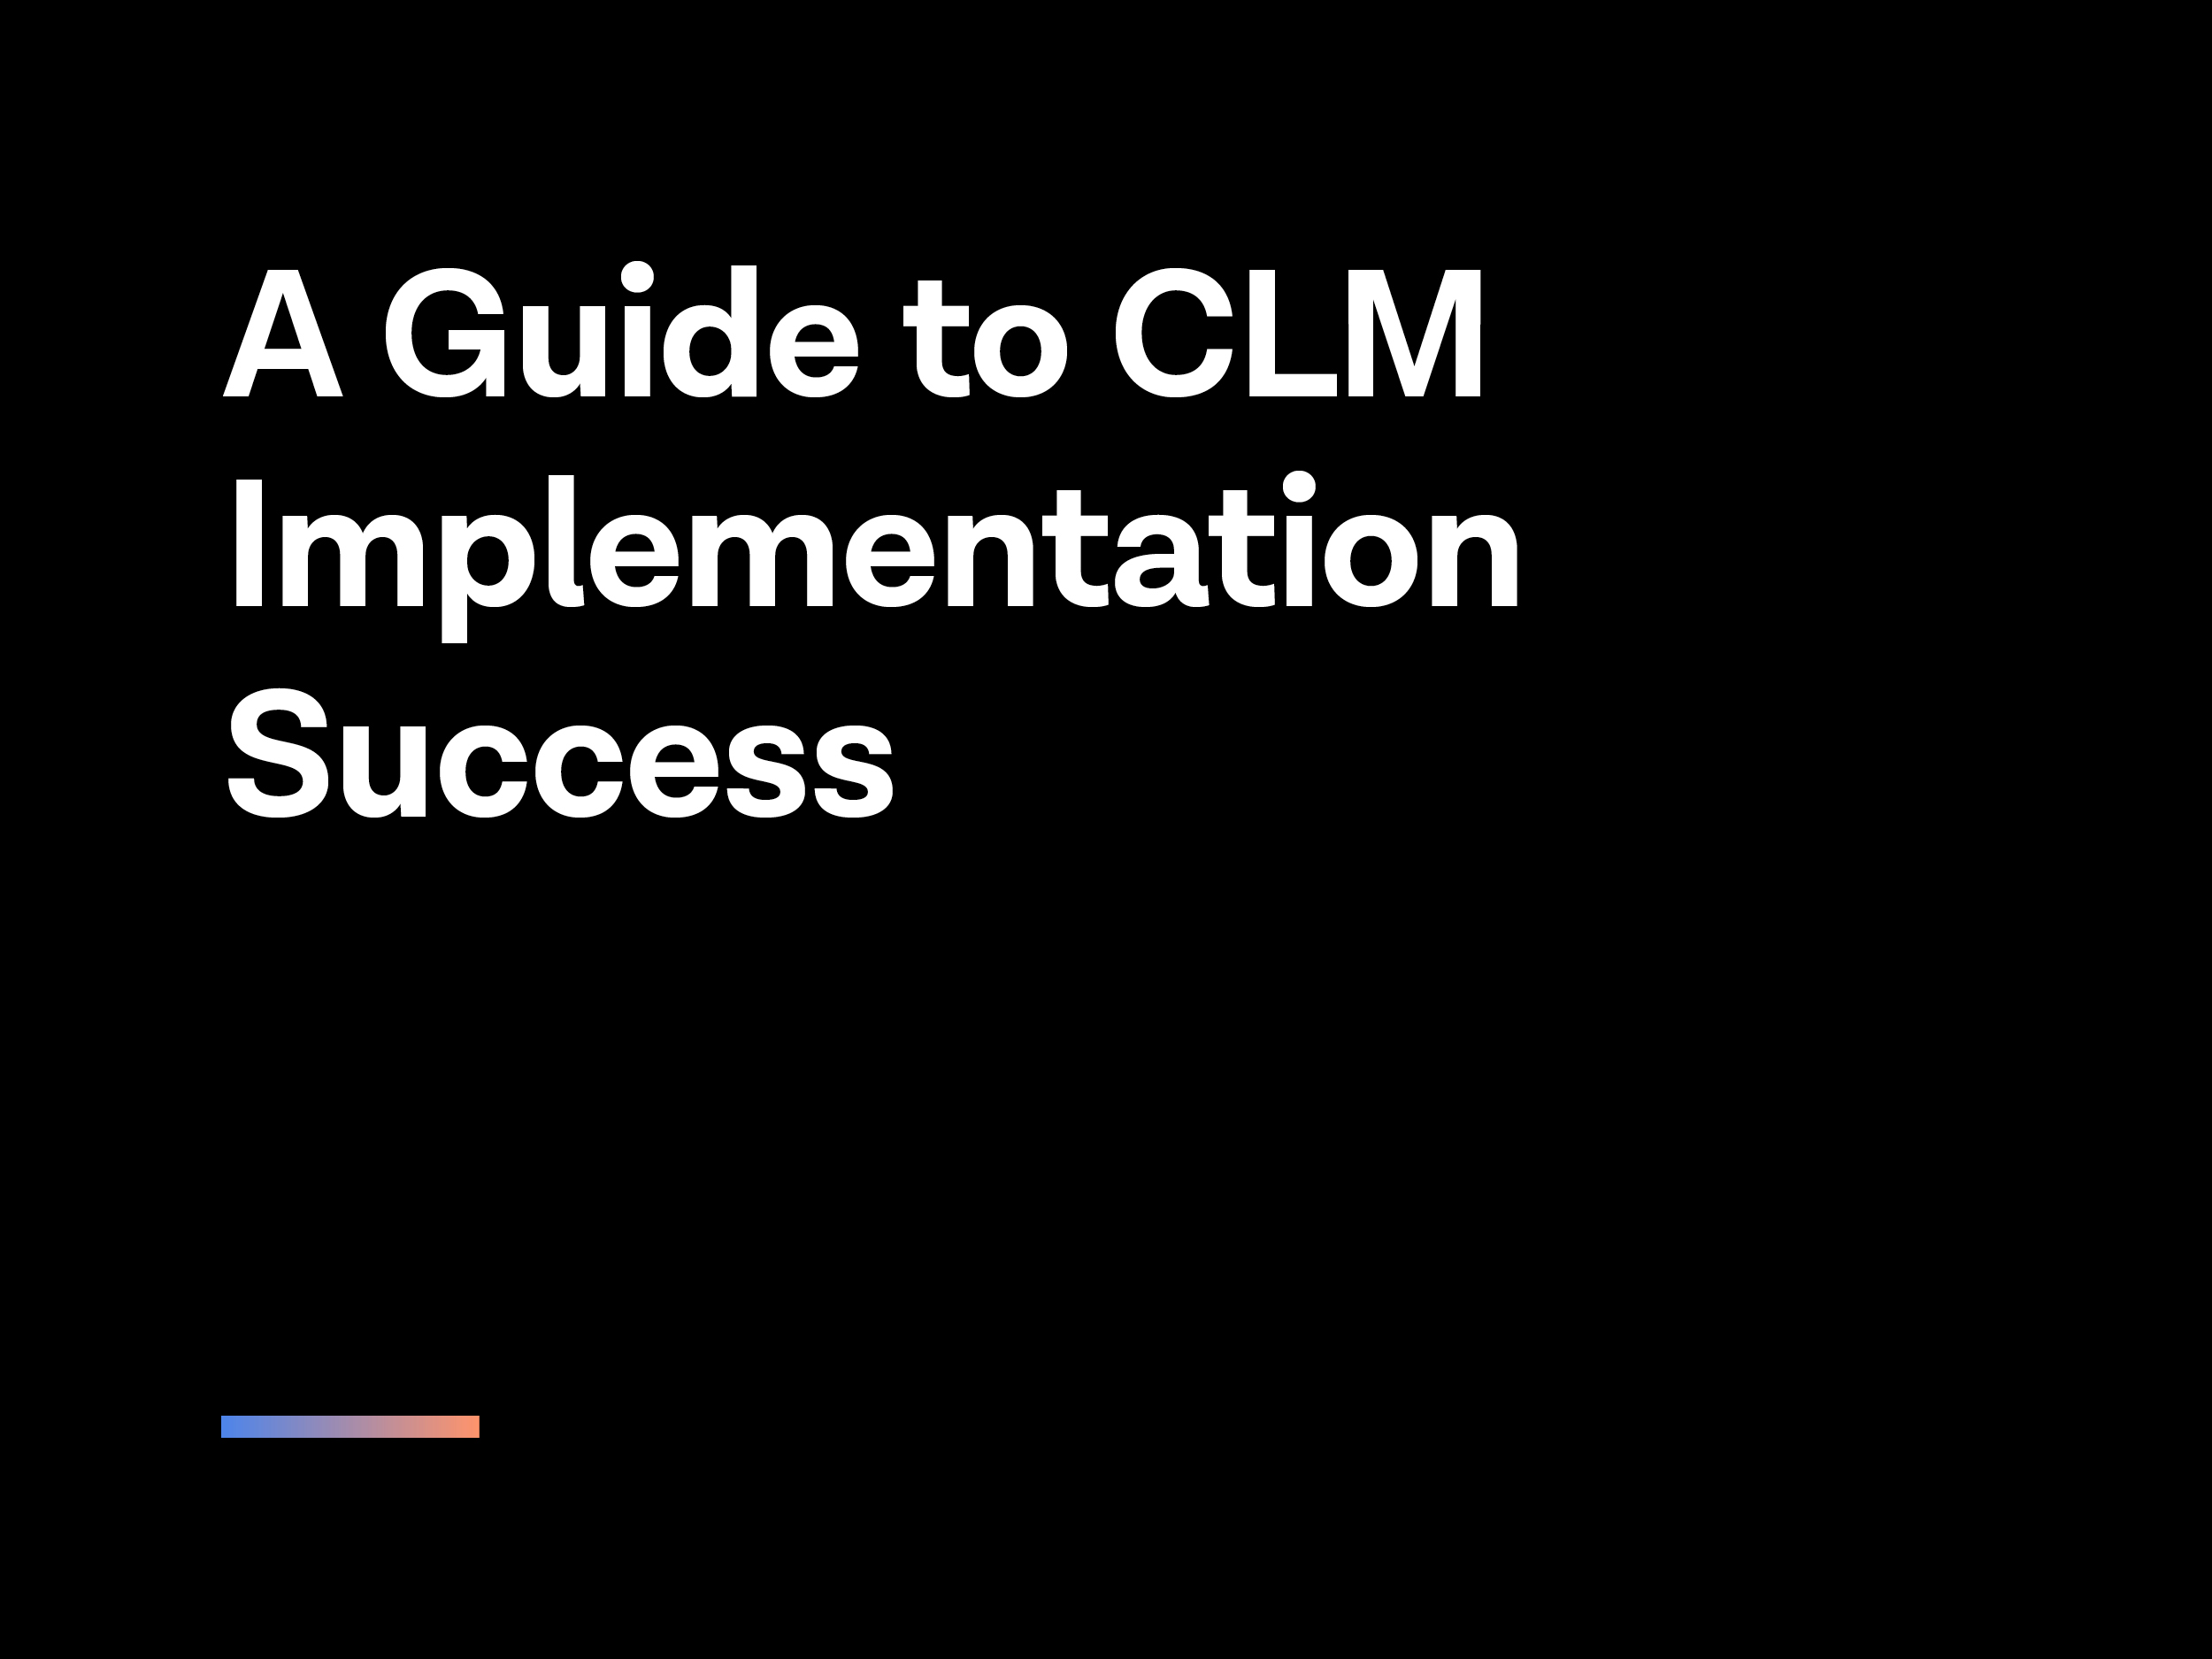 c365-ebook-guide-to-clm-implementation-success